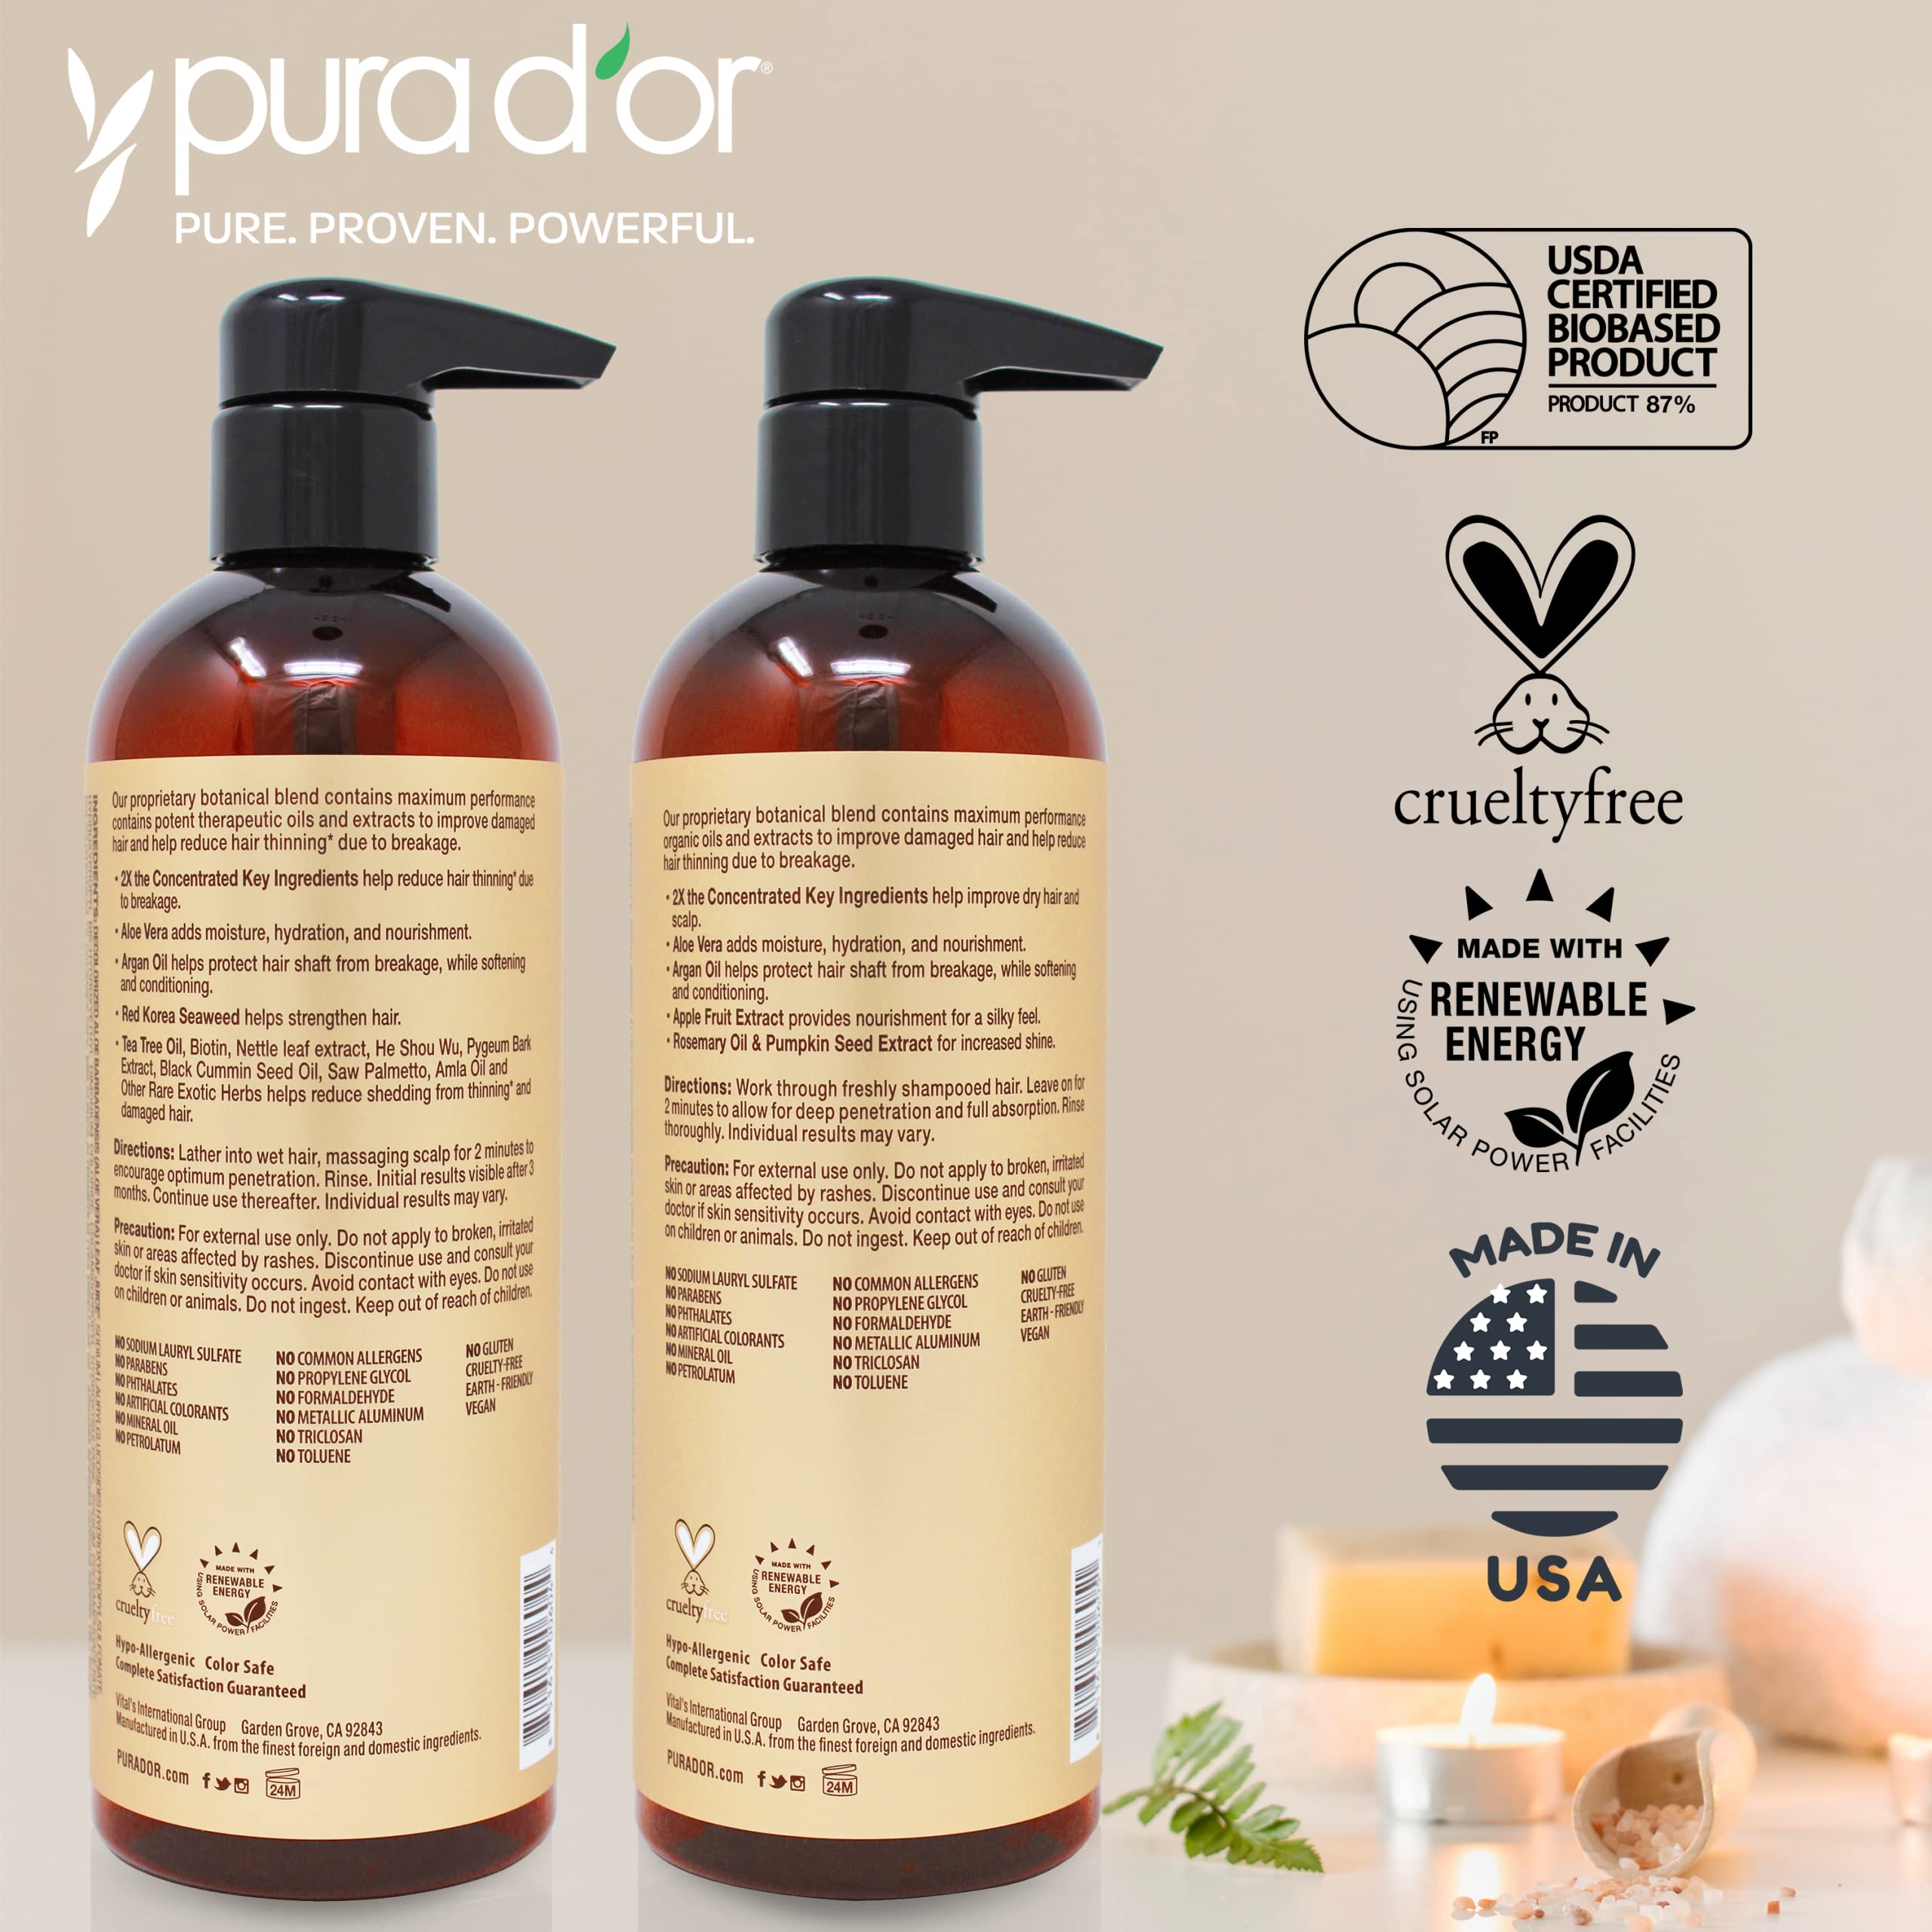 PURA D'OR Professional Grade Biotin Anti-Hair Thinning Shampoo & Conditioner, CLINICALLY TESTED Proven Results, 2X Concentrated DHT Blocker Thickening Products For Women & Men, Sulfate Free, 16oz x 2